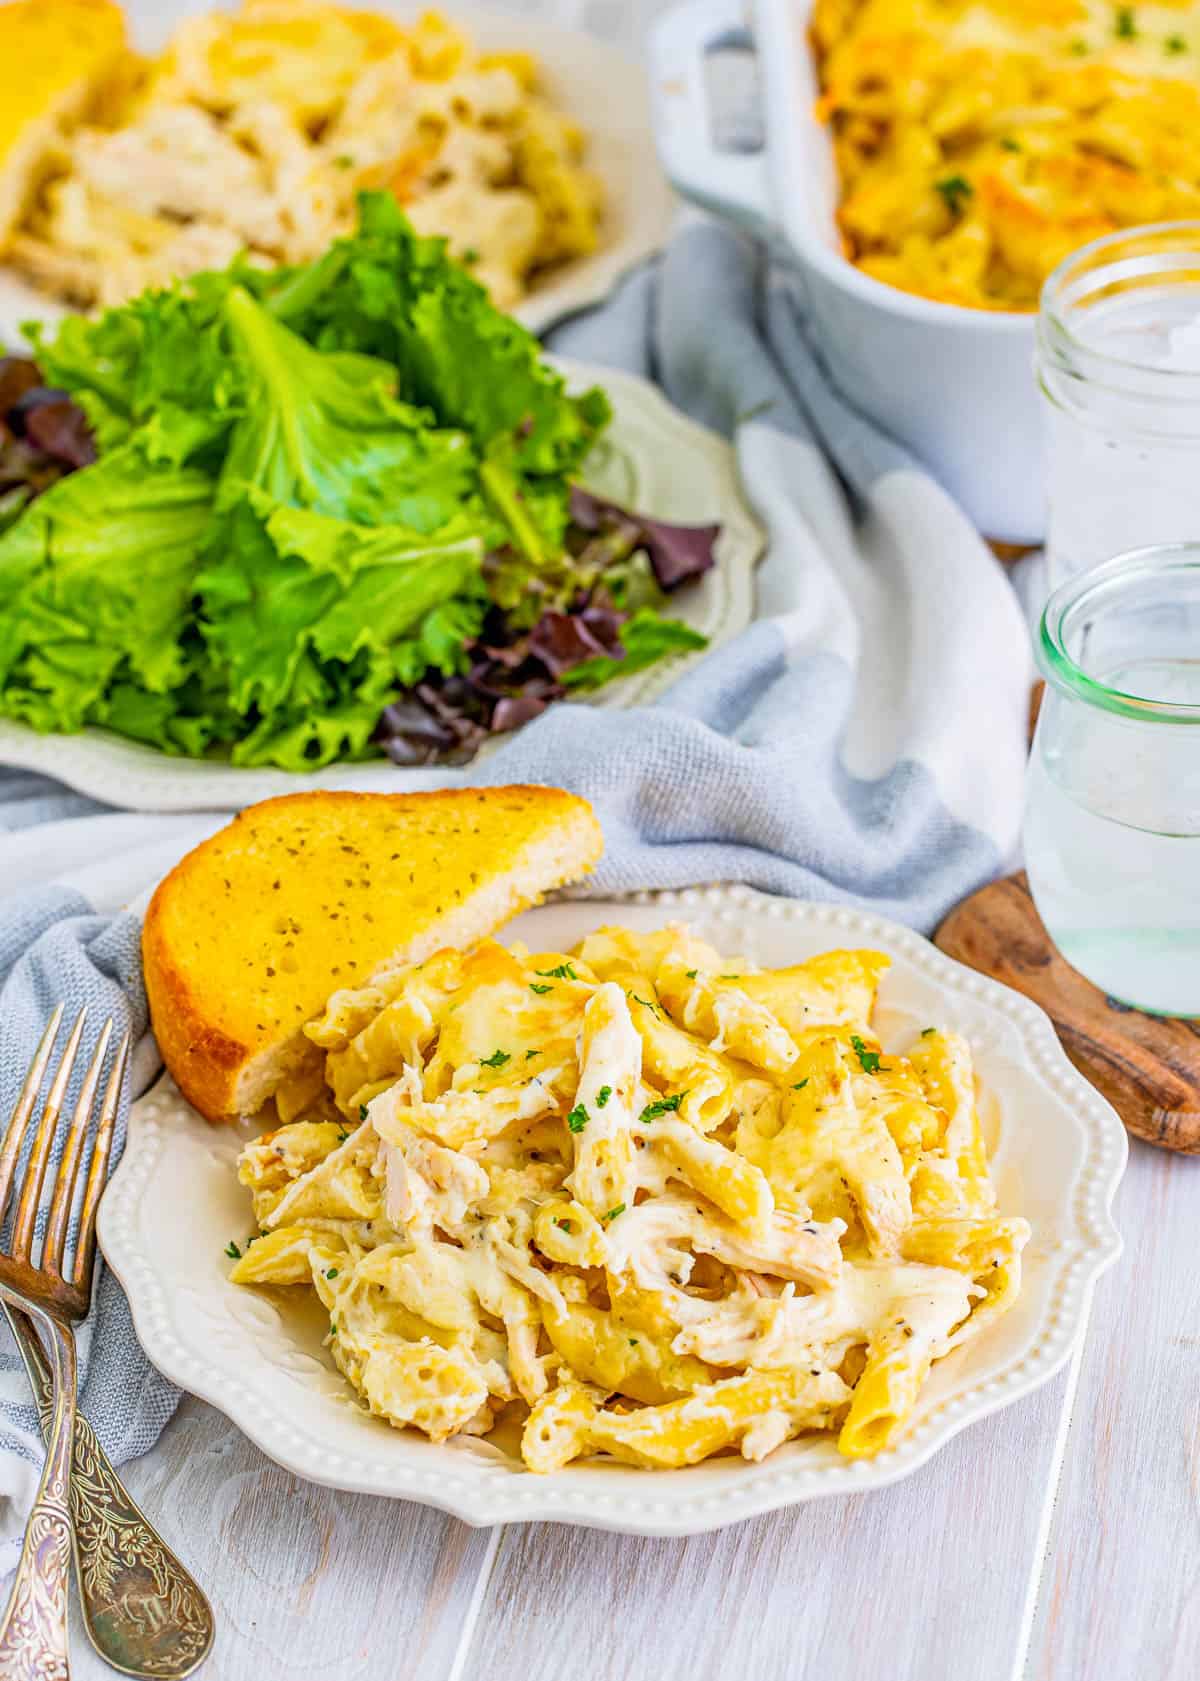 Chicken Alfredo Casserole on plate with bread and salad in background.